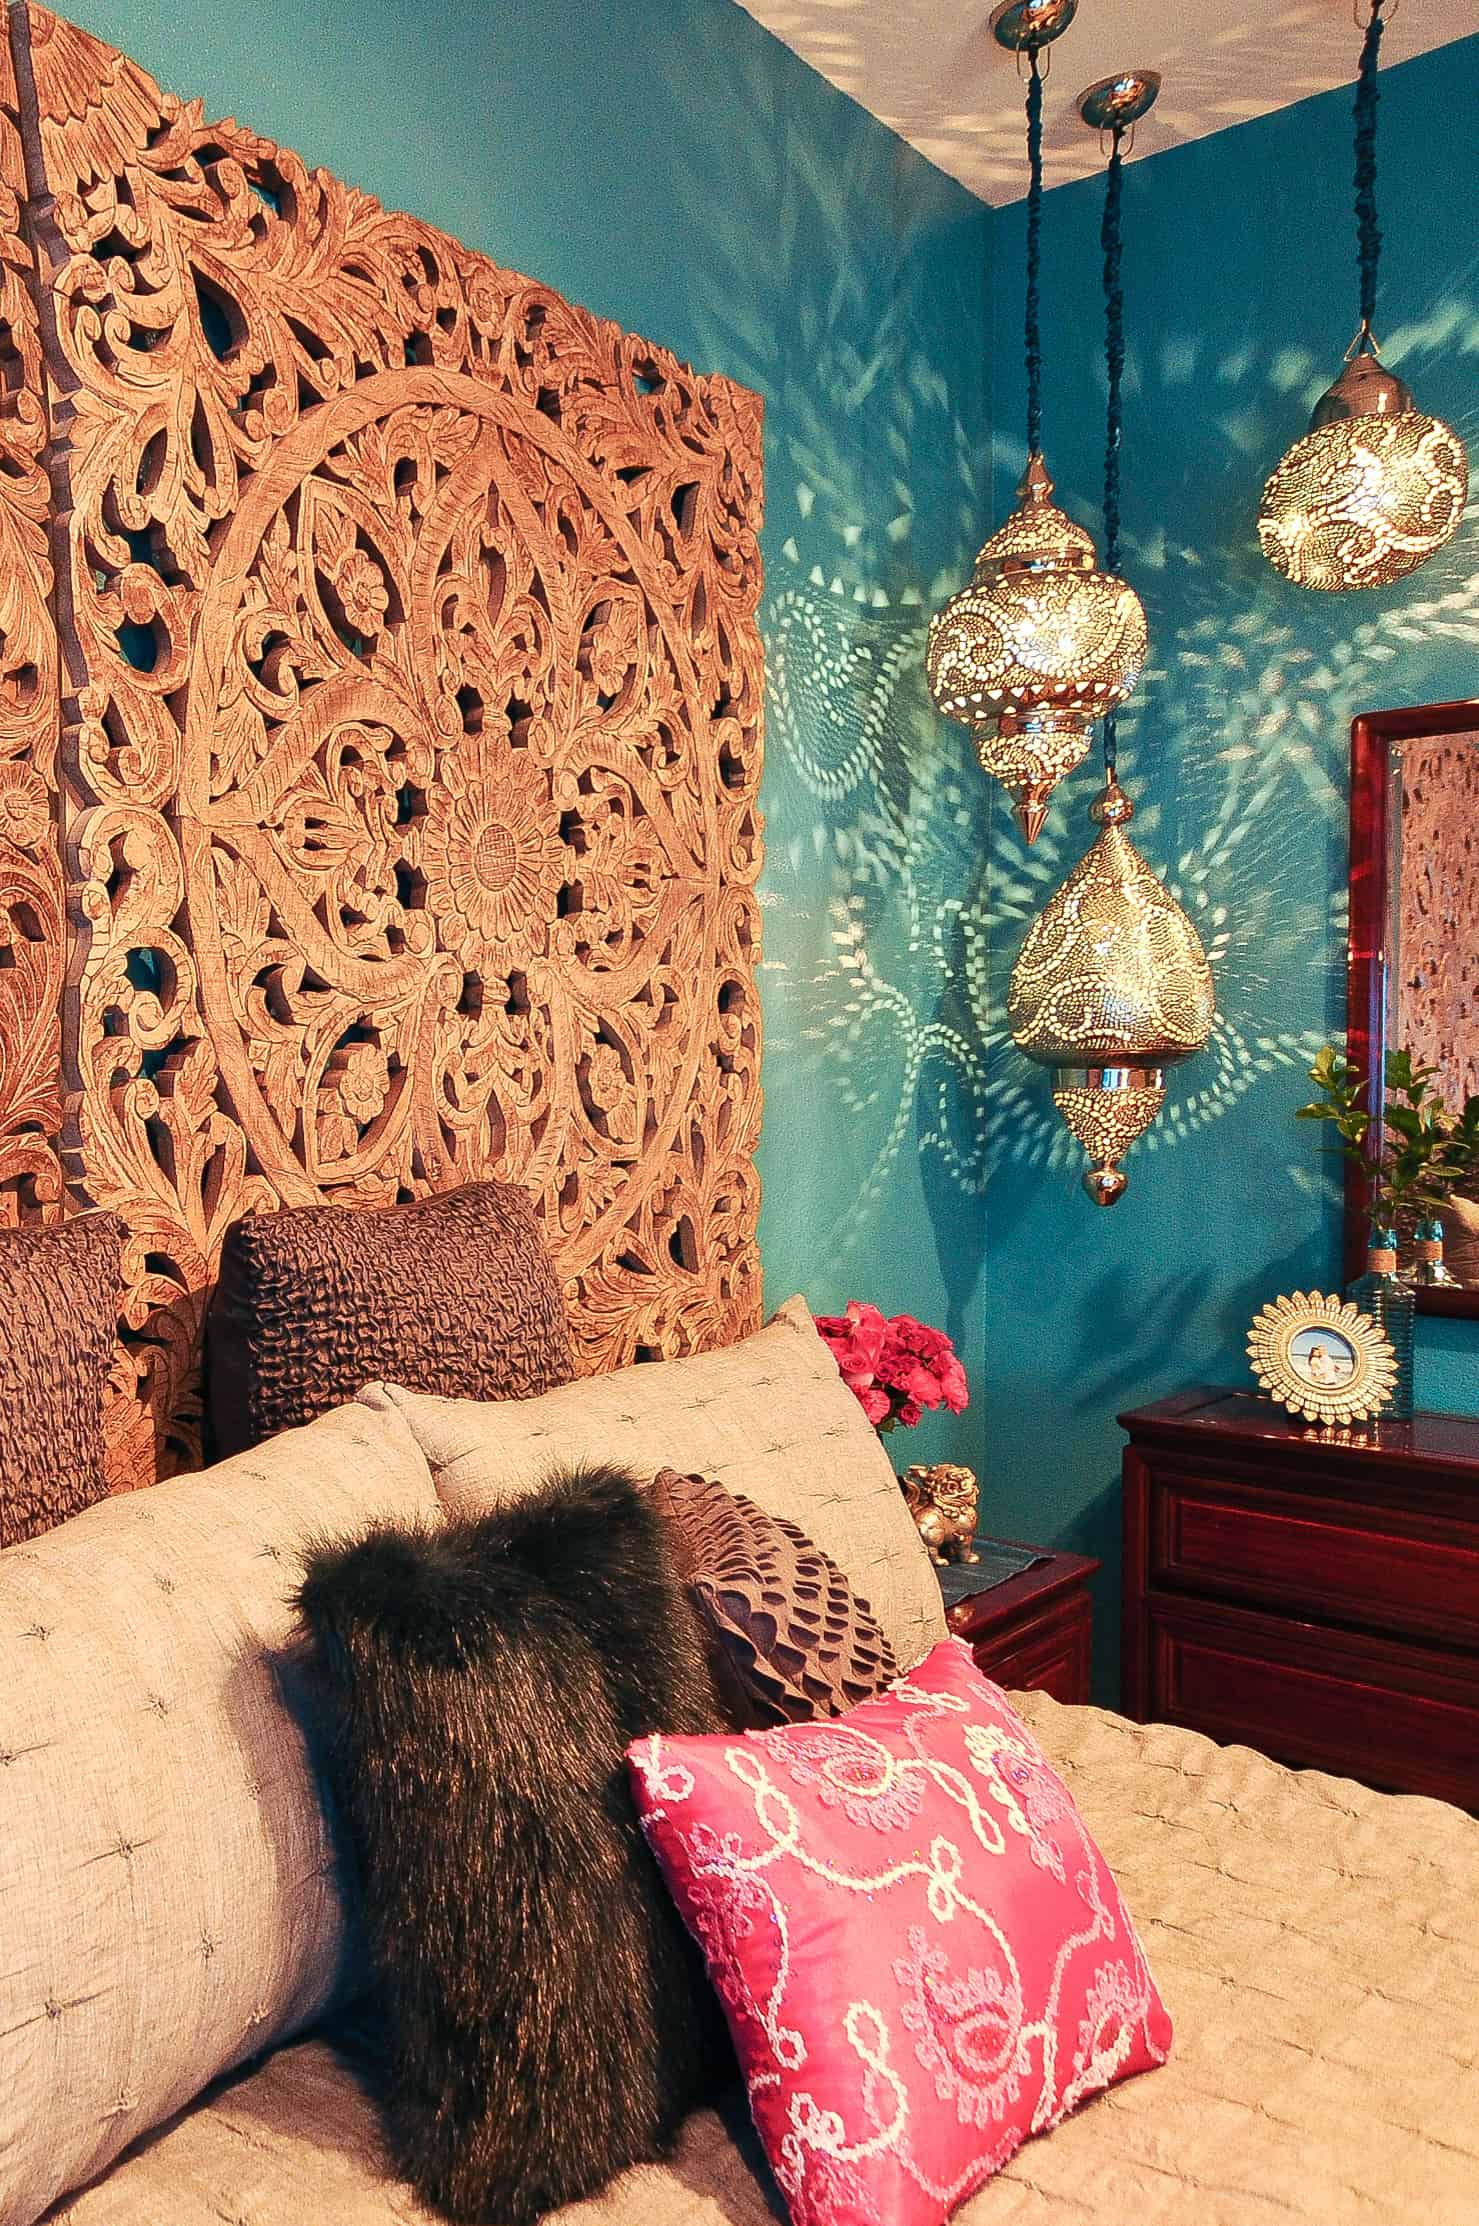 Morrocan pendants are great to add to any bedroom regardless of what decor you may have.